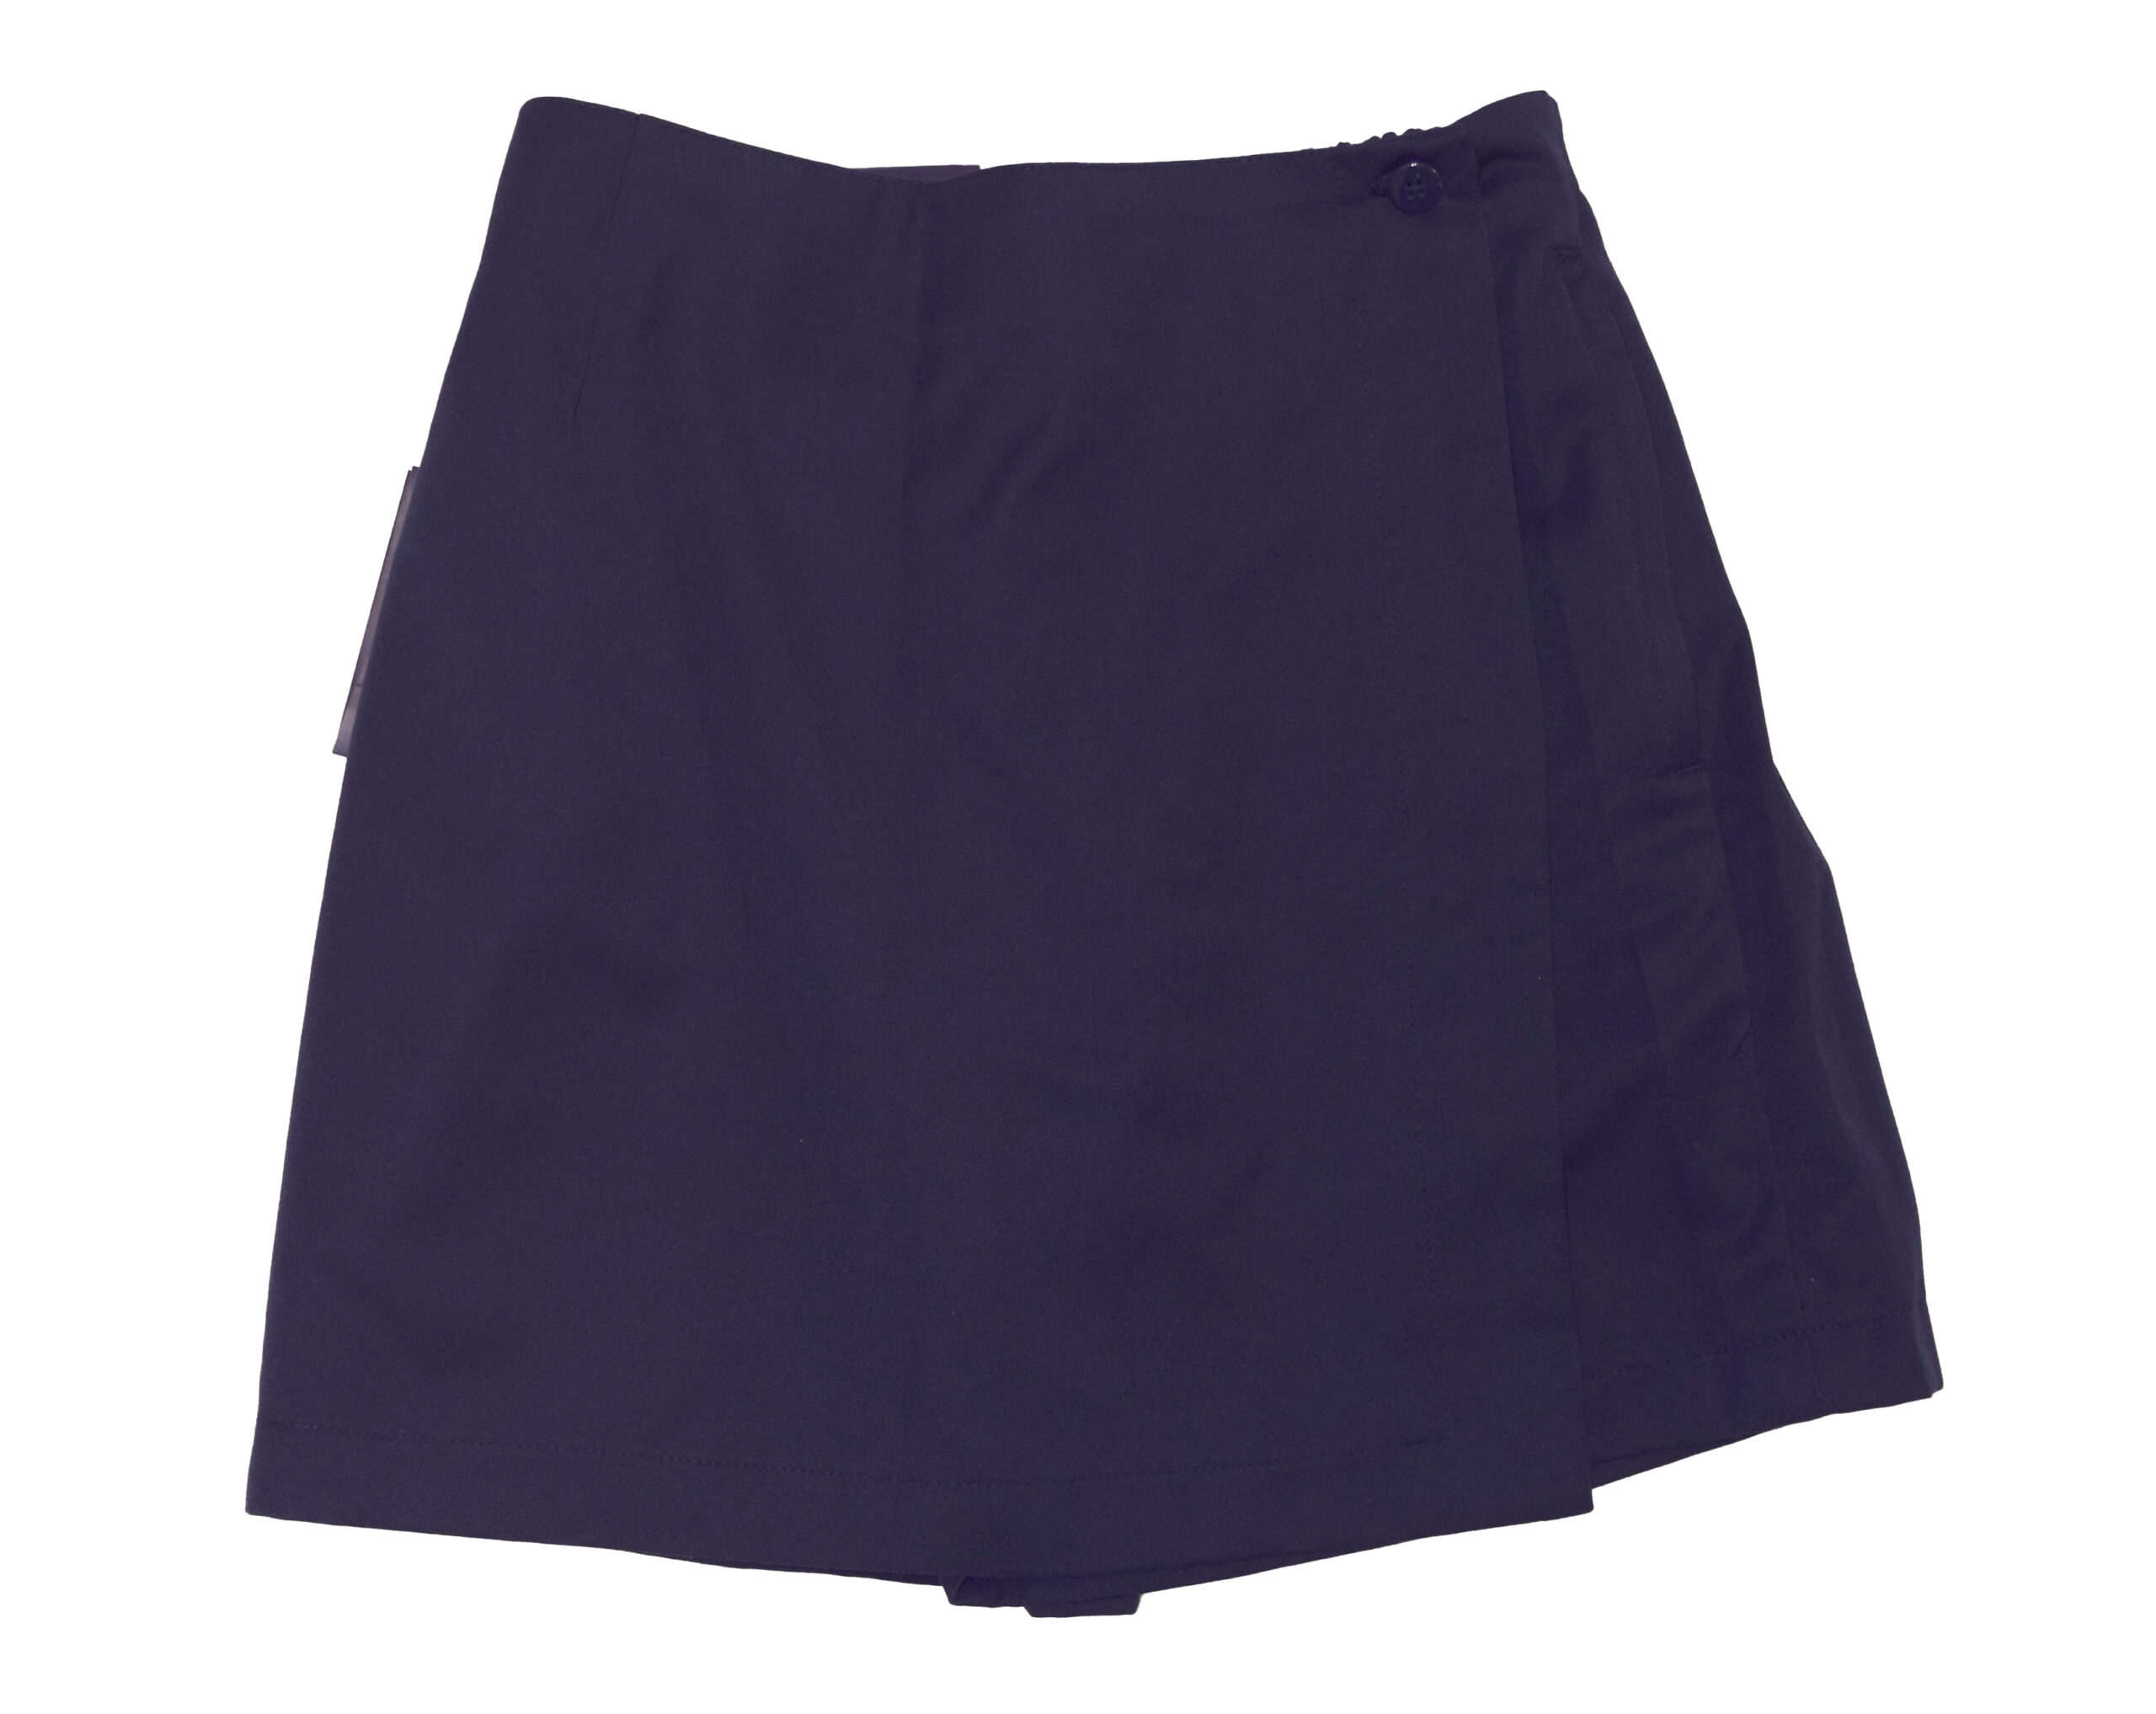 Skort (Primary only) - Moama Anglican Grammar